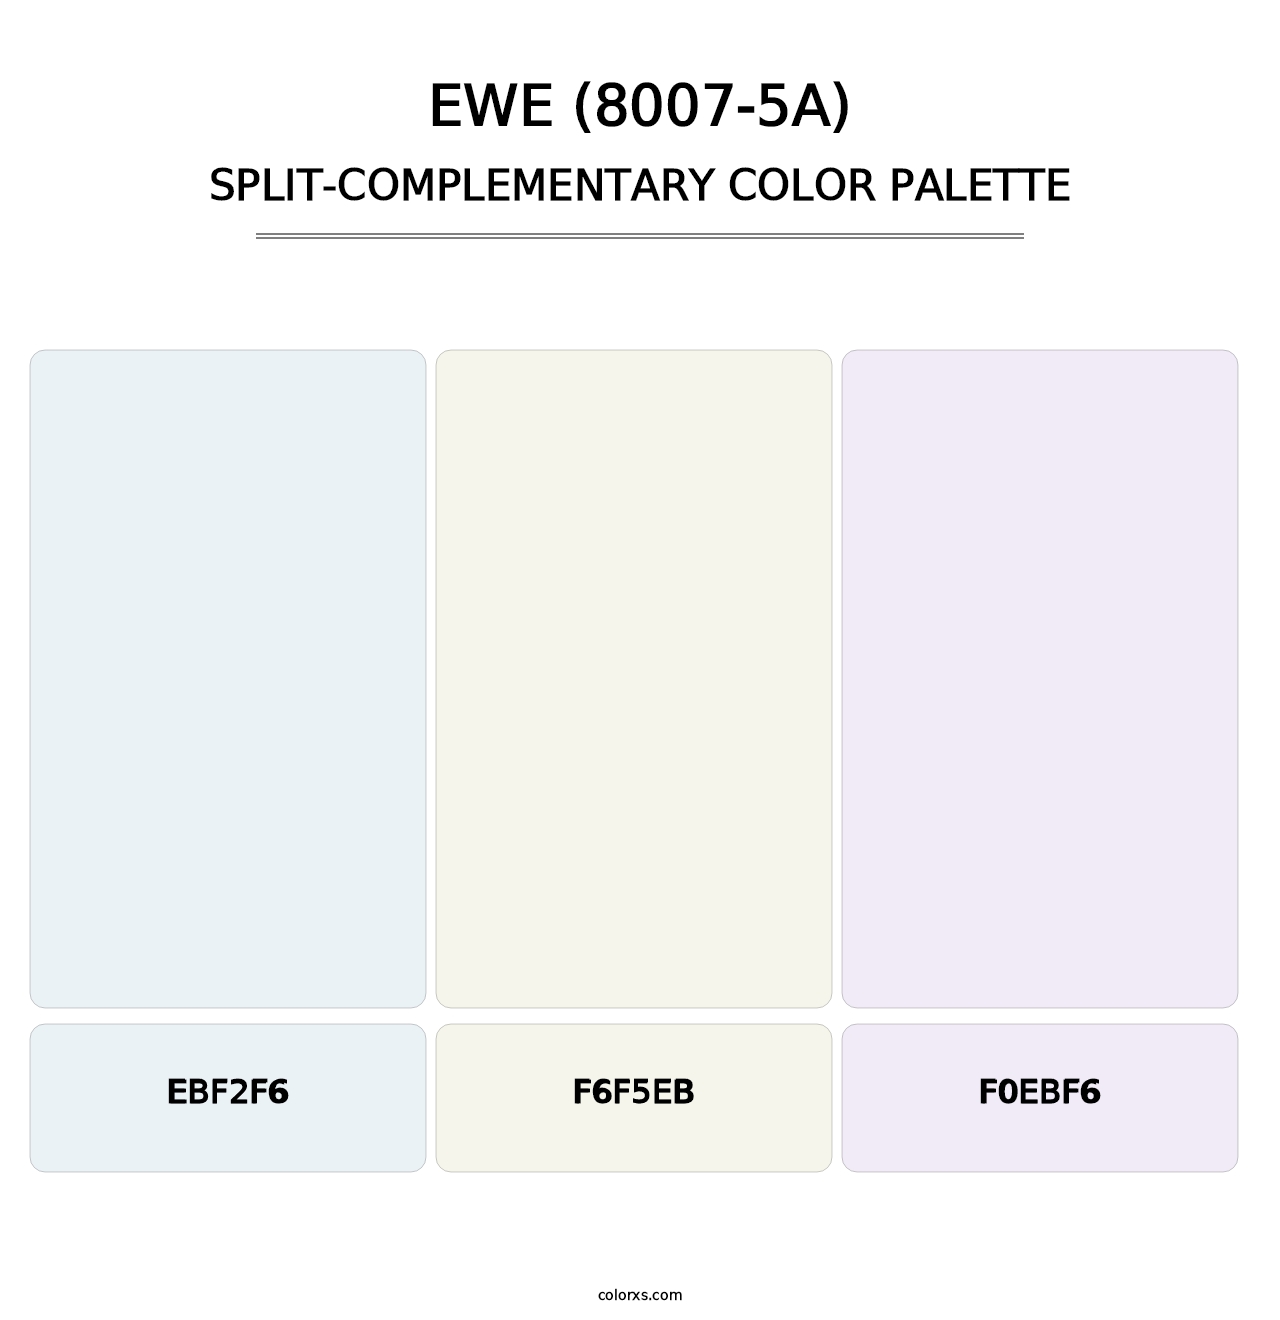 Ewe (8007-5A) - Split-Complementary Color Palette